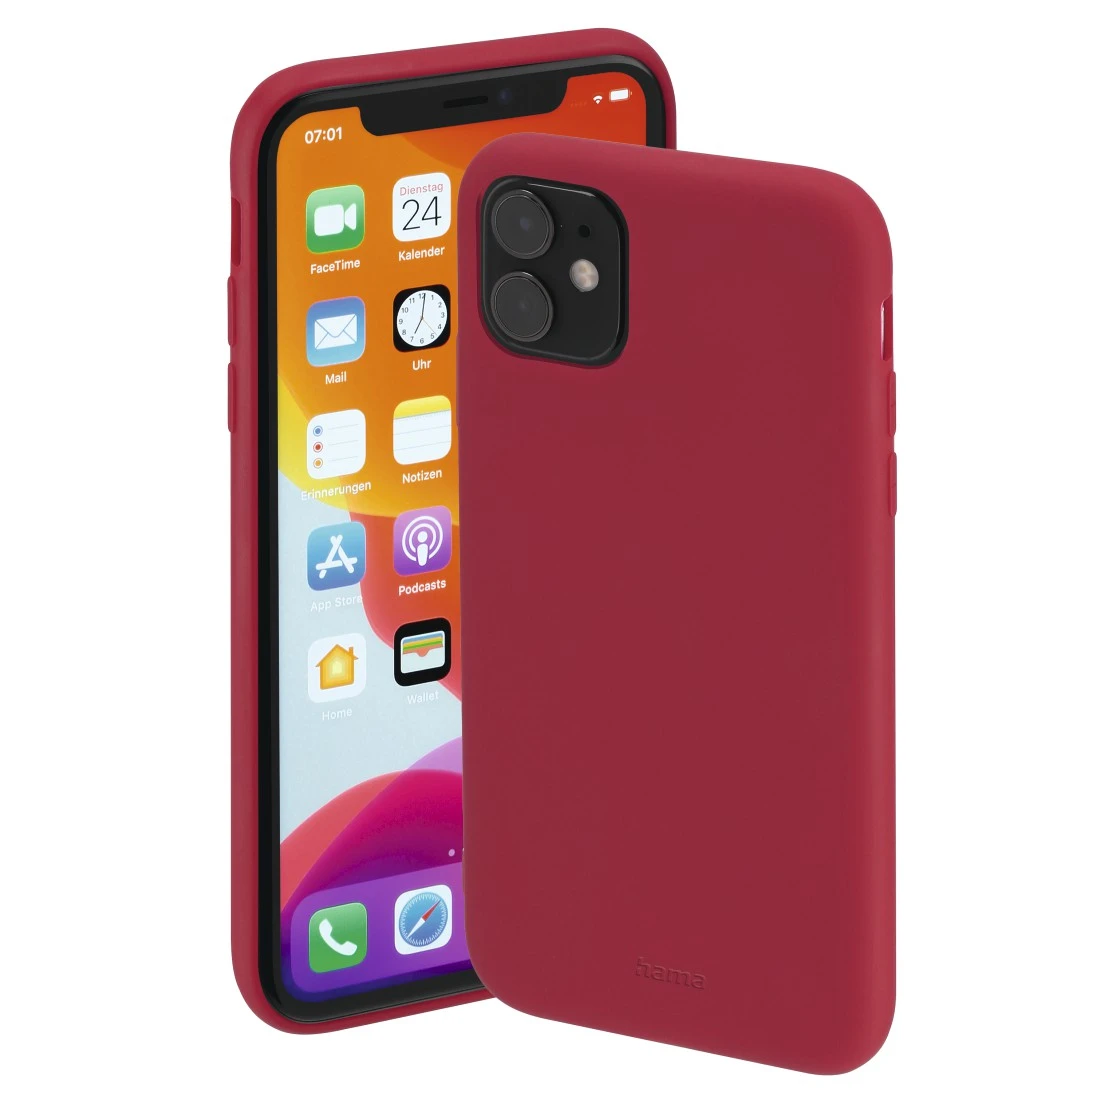 Coque iPhone 13 silicone couleur Rouge 